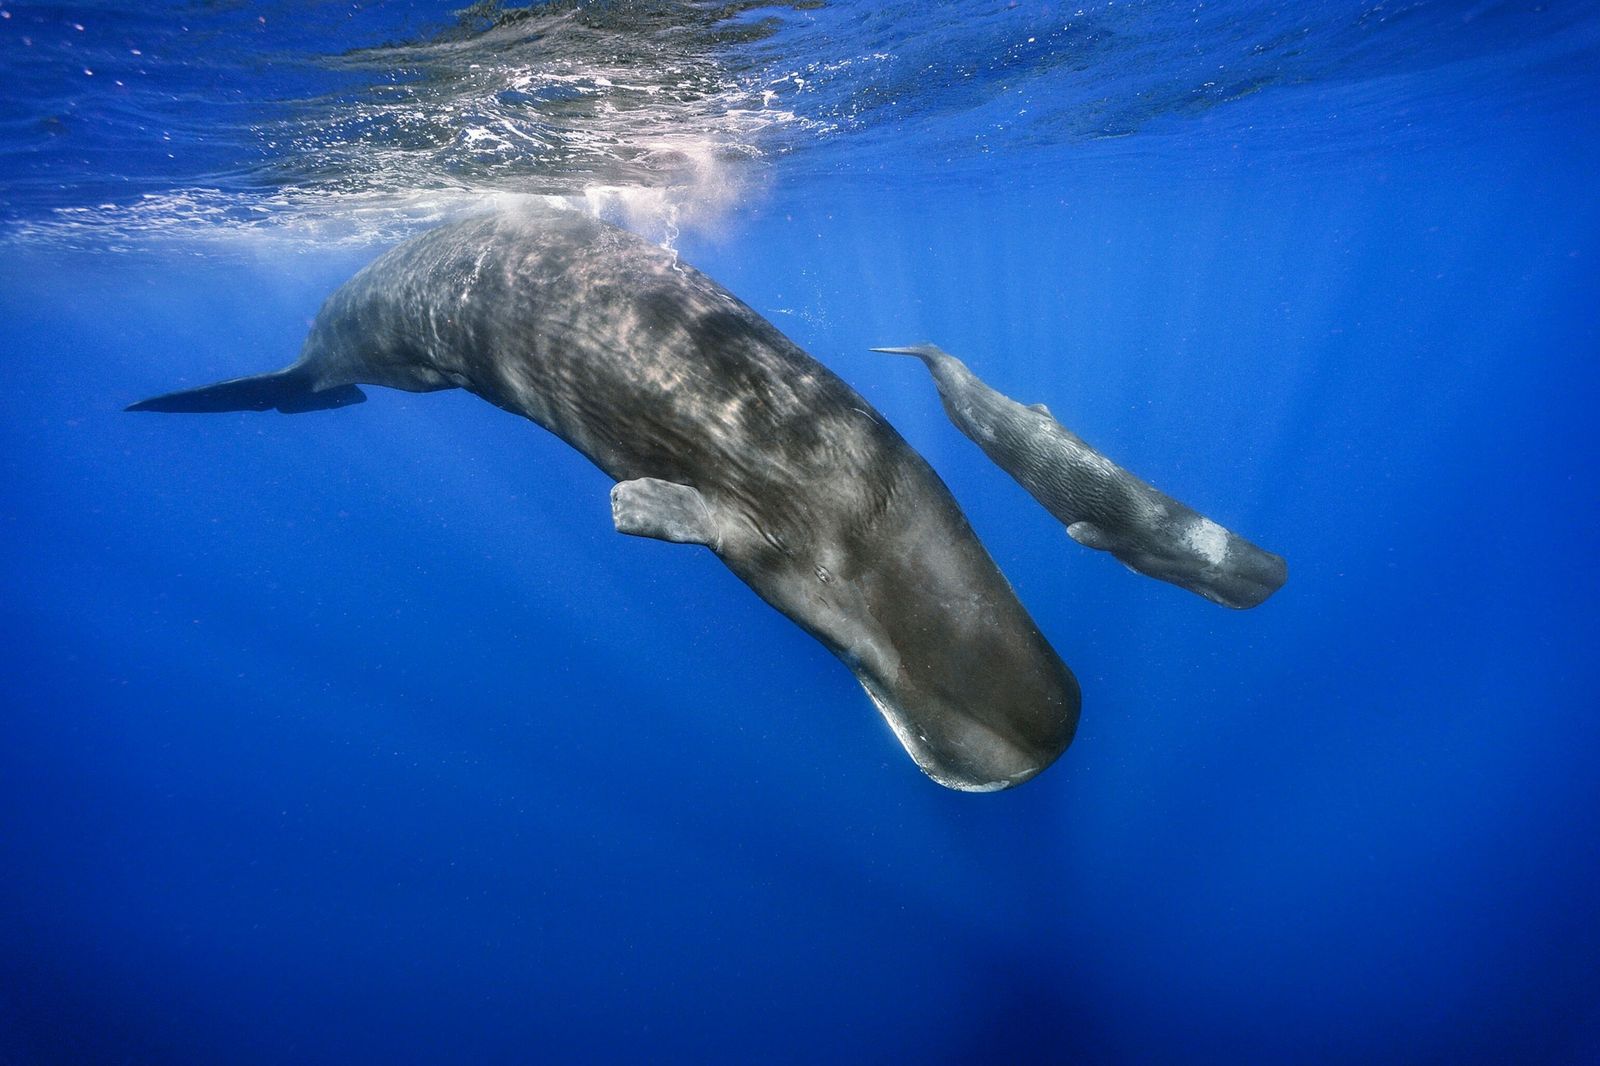 The modern artificial intelligence project aims to decipher the whale language